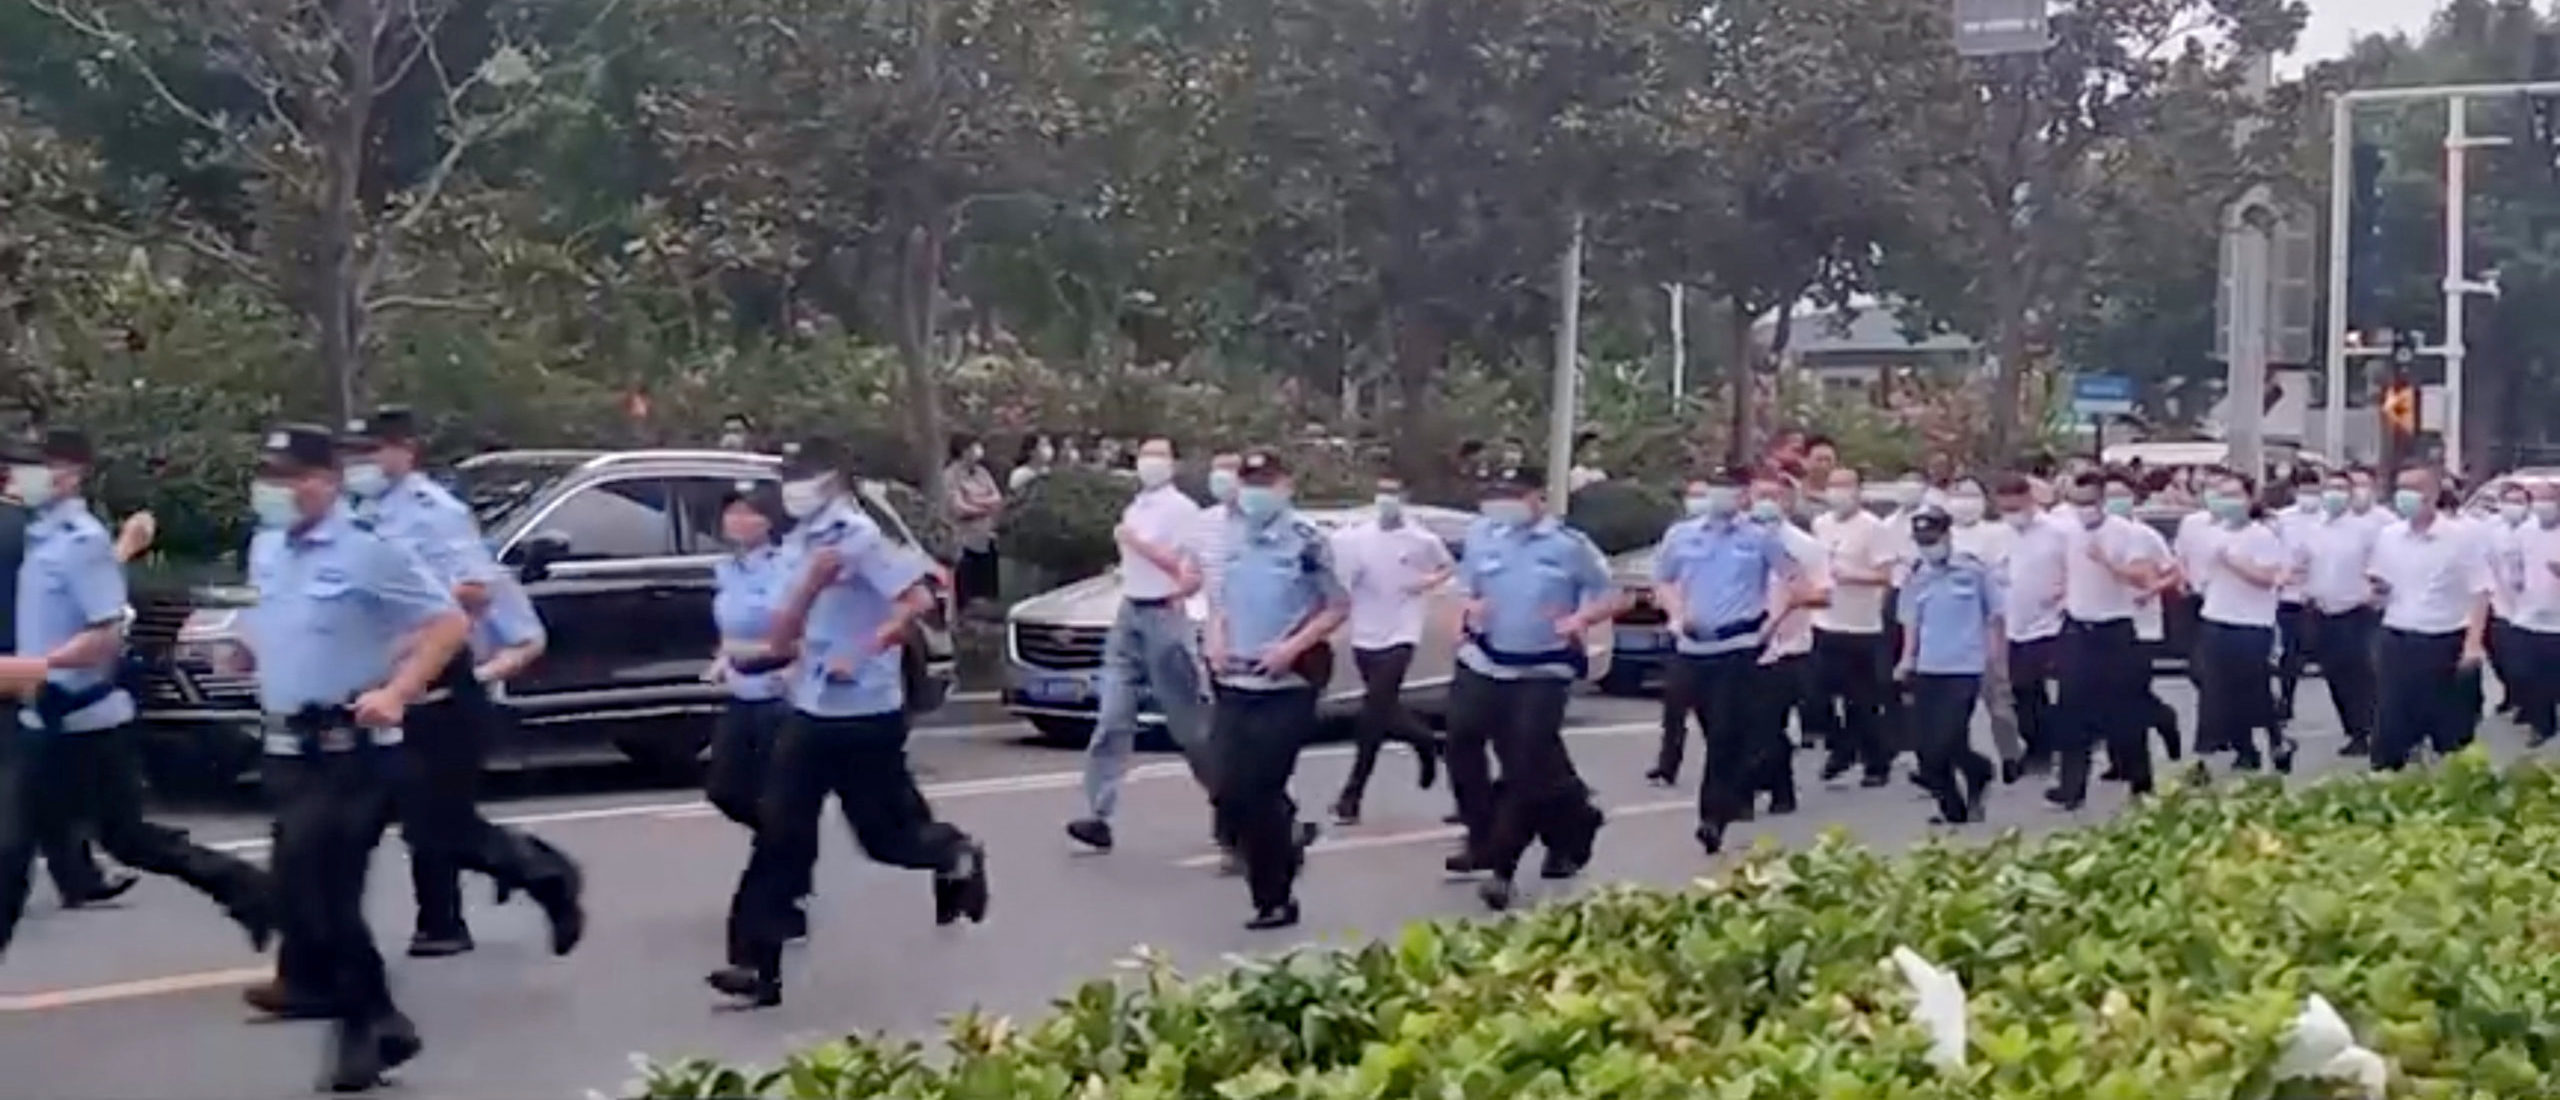 Uniformed and plain-clothed security personnel run to approach demonstrators, outside a People's Bank of China building, who are there protesting over the freezing of deposits by some rural-based banks, in Zhengzhou, Henan province, China July 10, 2022, in this screengrab from video obtained by Reuters. (Reuters)